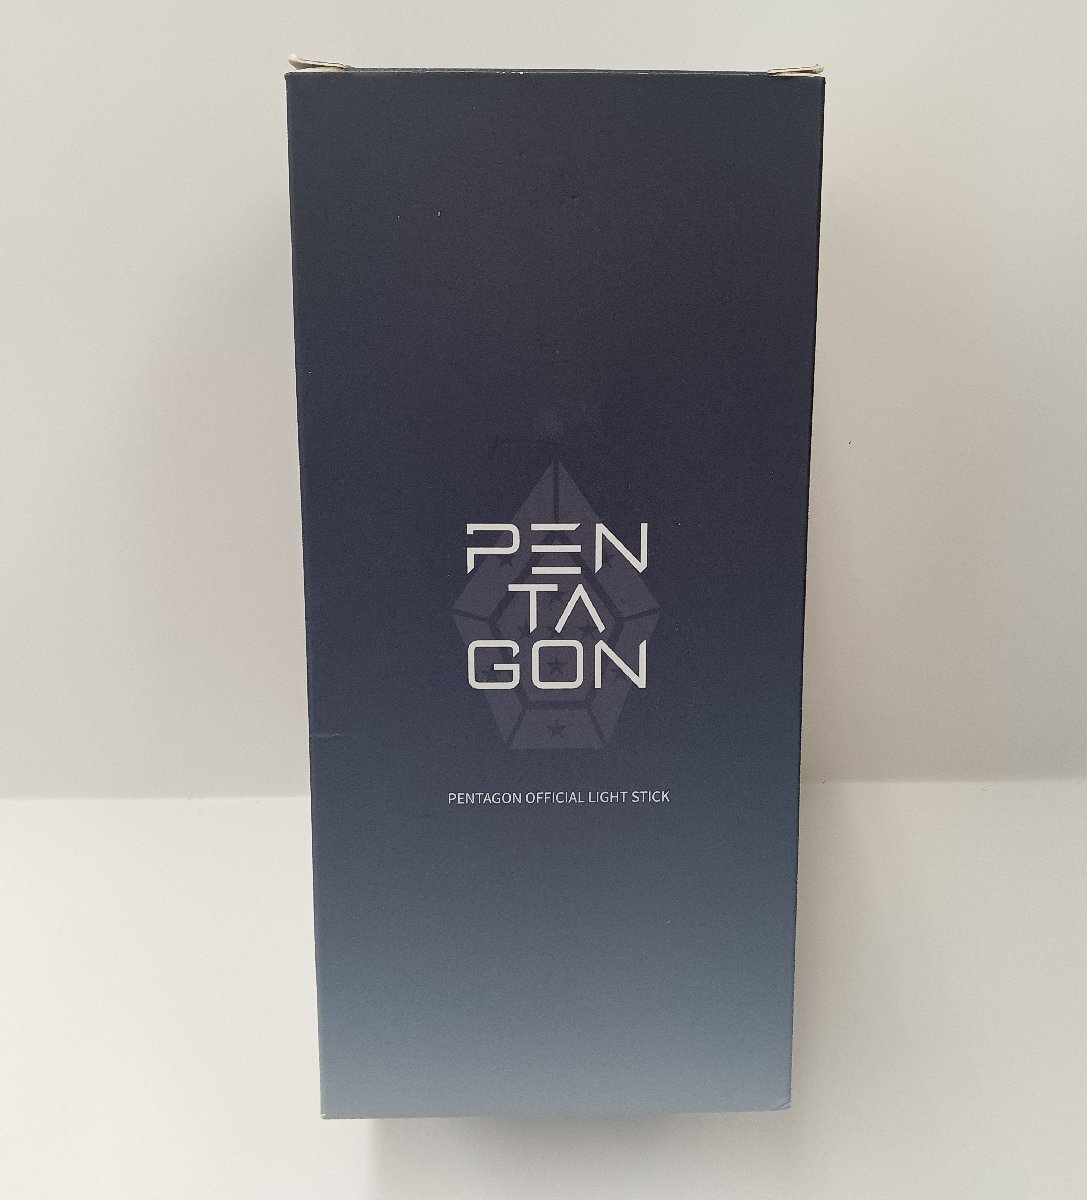 * secondhand goods * PETAGON official light stick penlight pen tagon operation verification ending [ other commodity . including in a package welcome ]